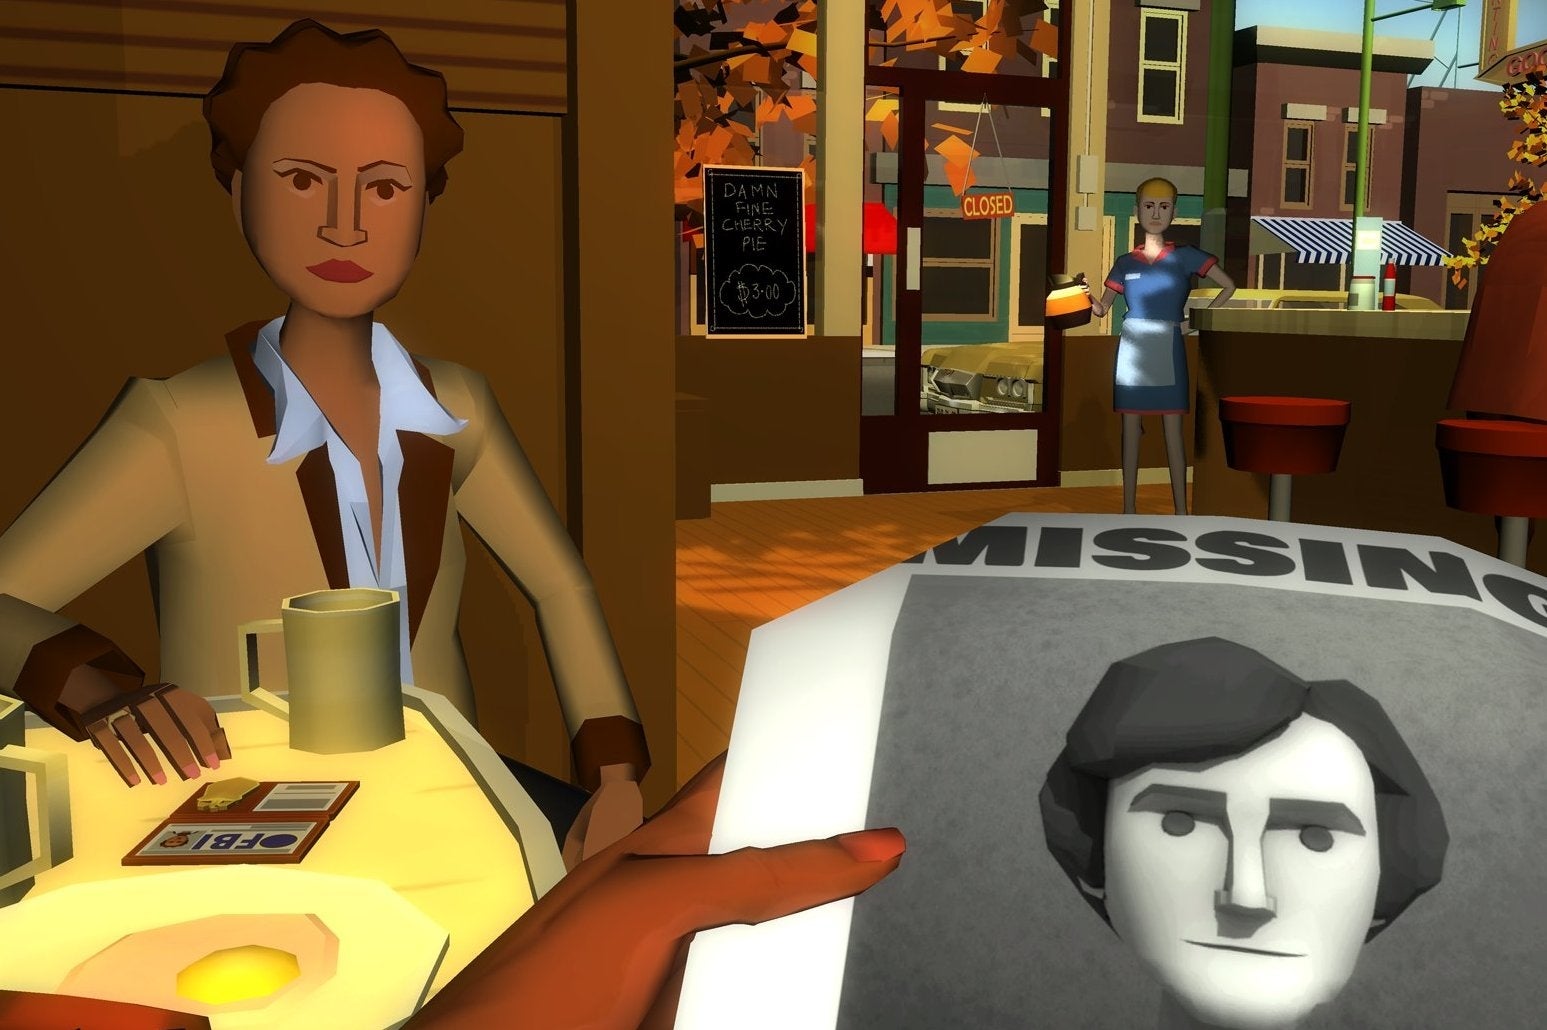 Image for Virginia is a first-person interactive drama inspired by Twin Peaks and X-Files